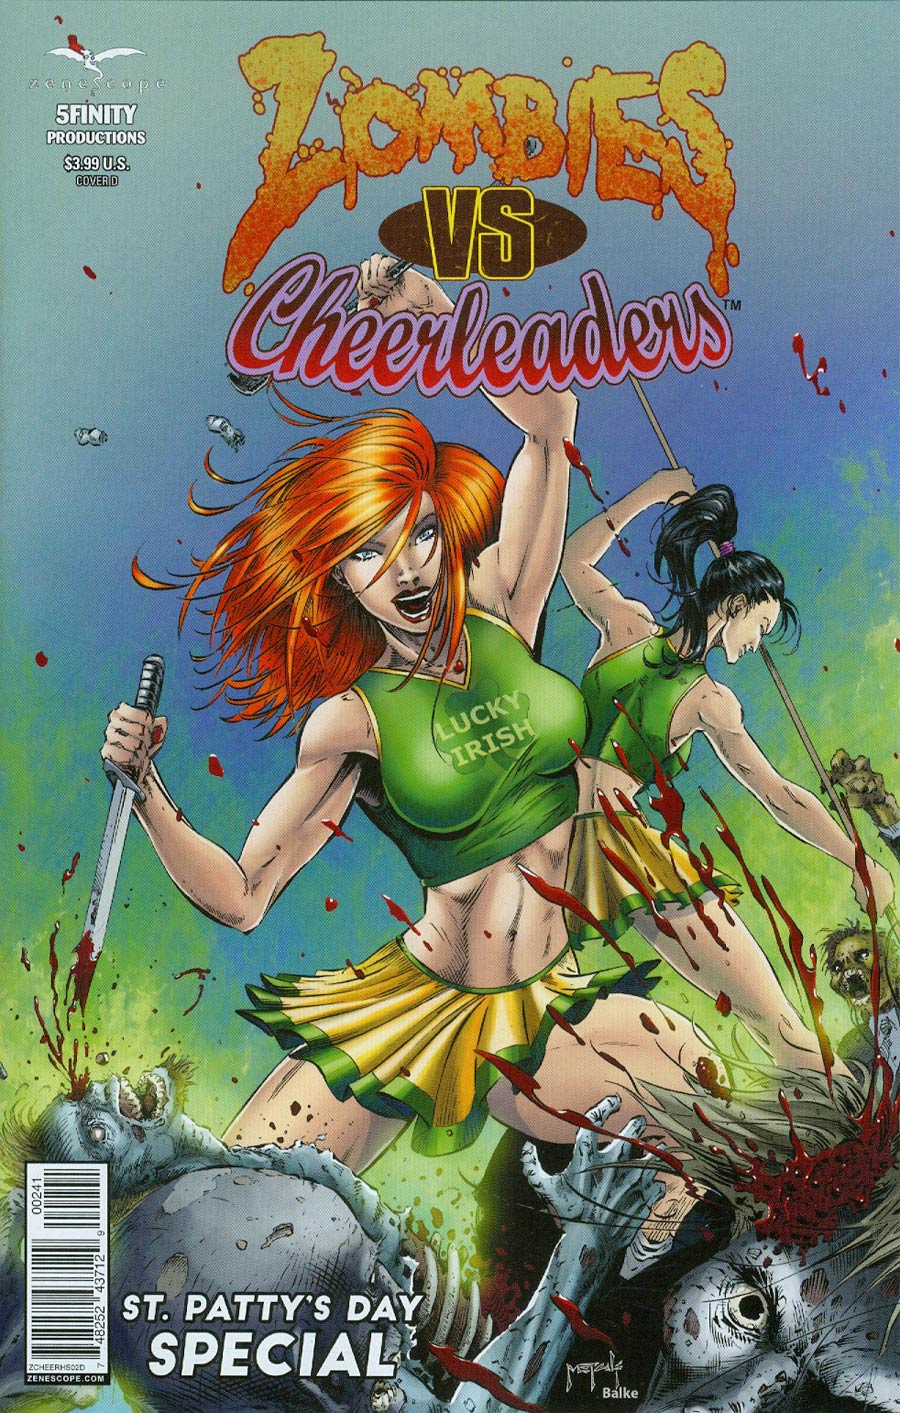 Zombies vs Cheerleaders 2015 St Pattys Day Special Cover D Jason Metcalf